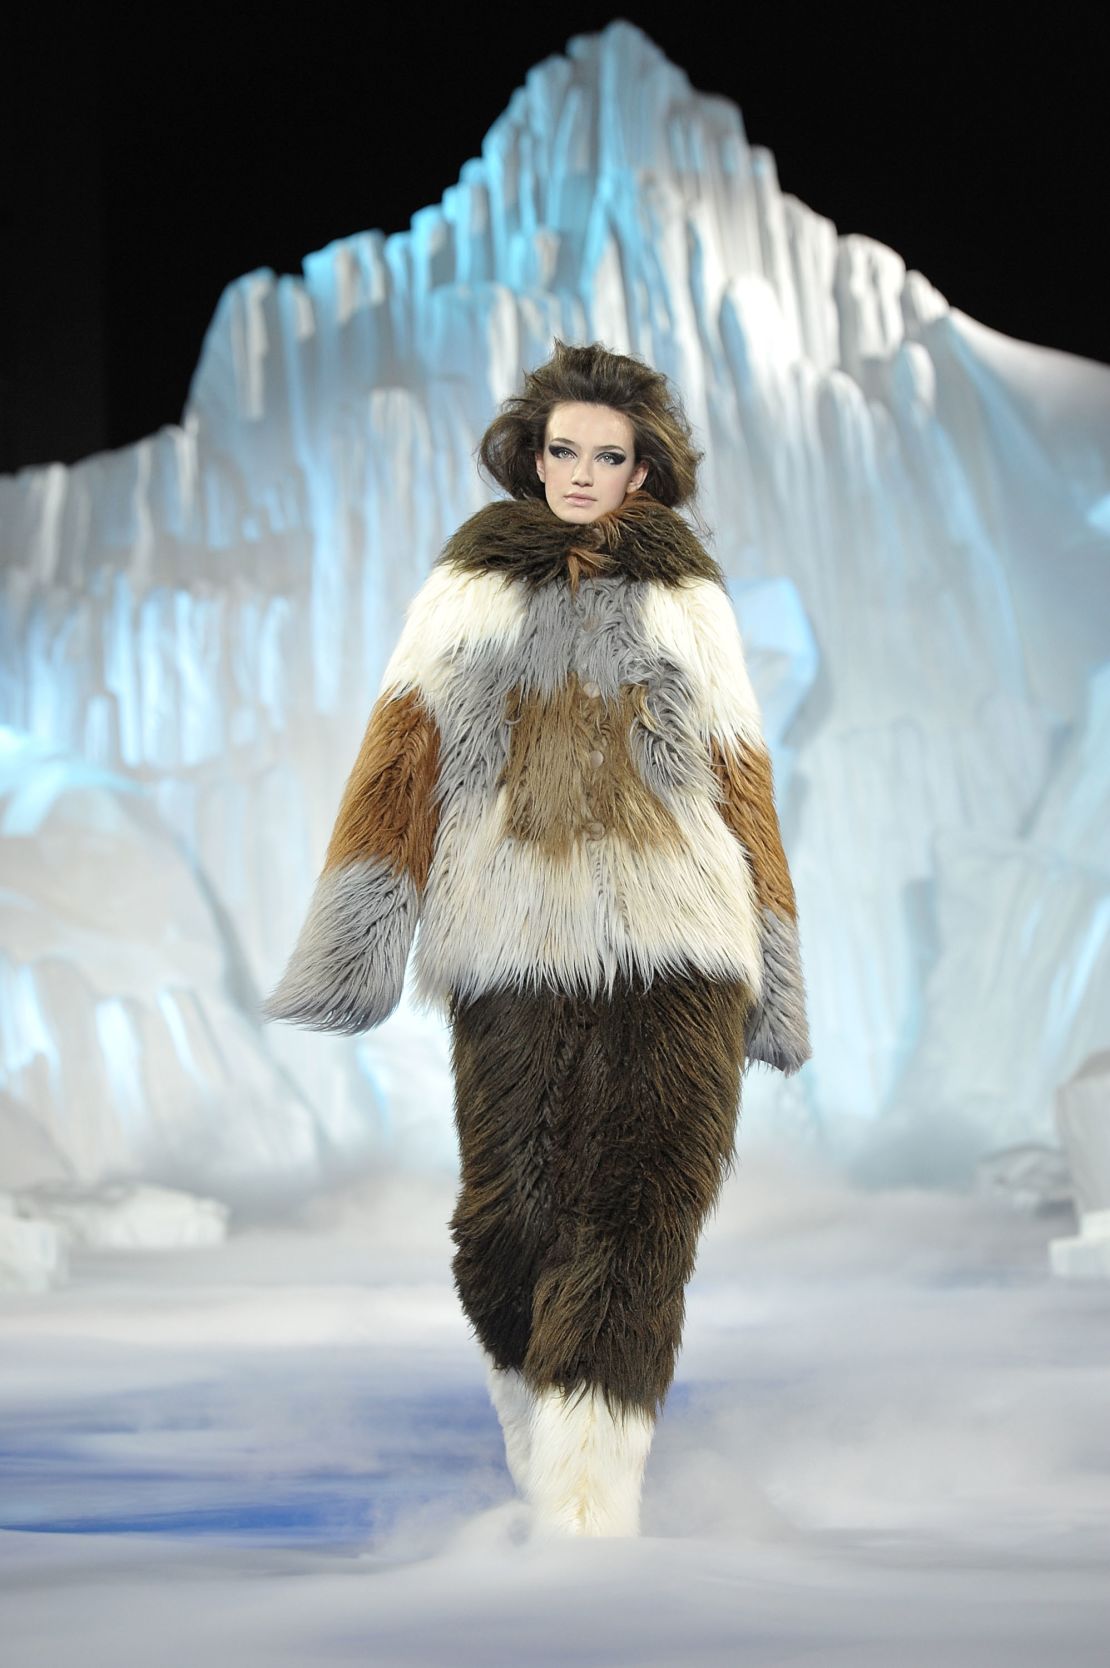 Chanel Fall-Winter 2010 collection showed at Yoyogi National Gymnasium on June 23, 2010 in Tokyo, Japan. The fur used in the show was faux fur.